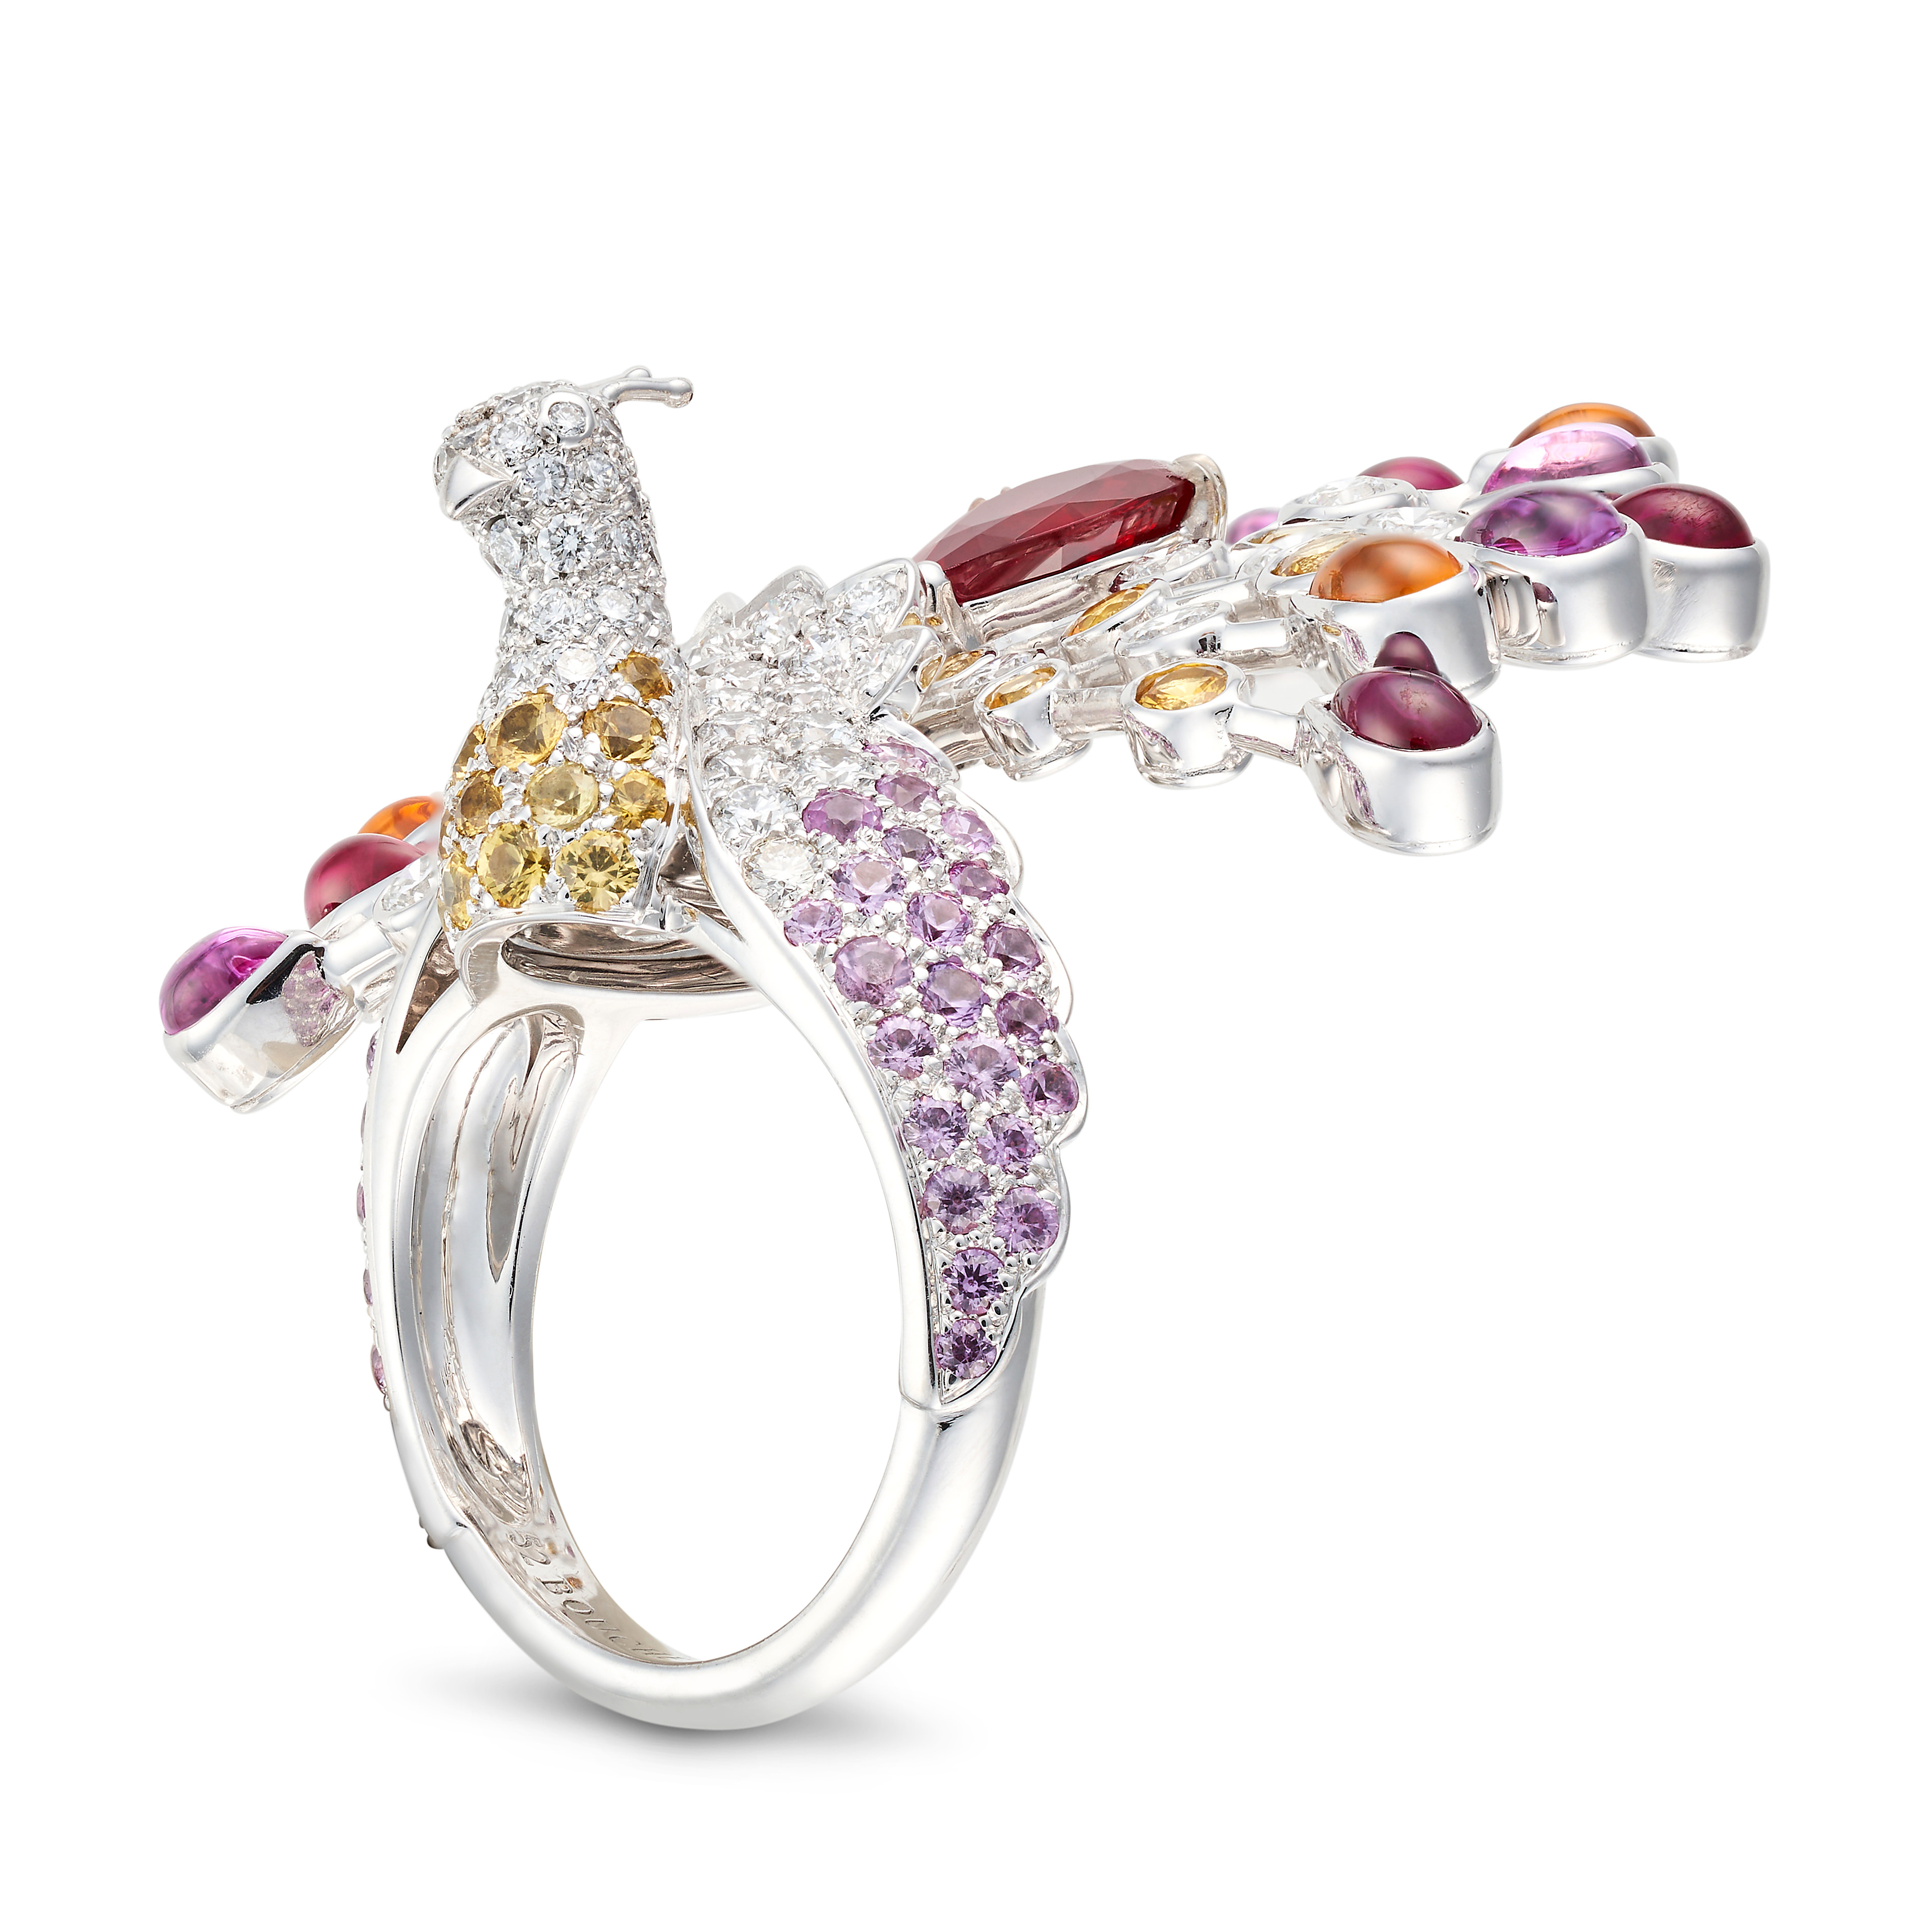 BOUCHERON, A MULTIGEM PEACOCK RING designed as a peacock set with round brilliant cut diamonds an... - Image 3 of 4